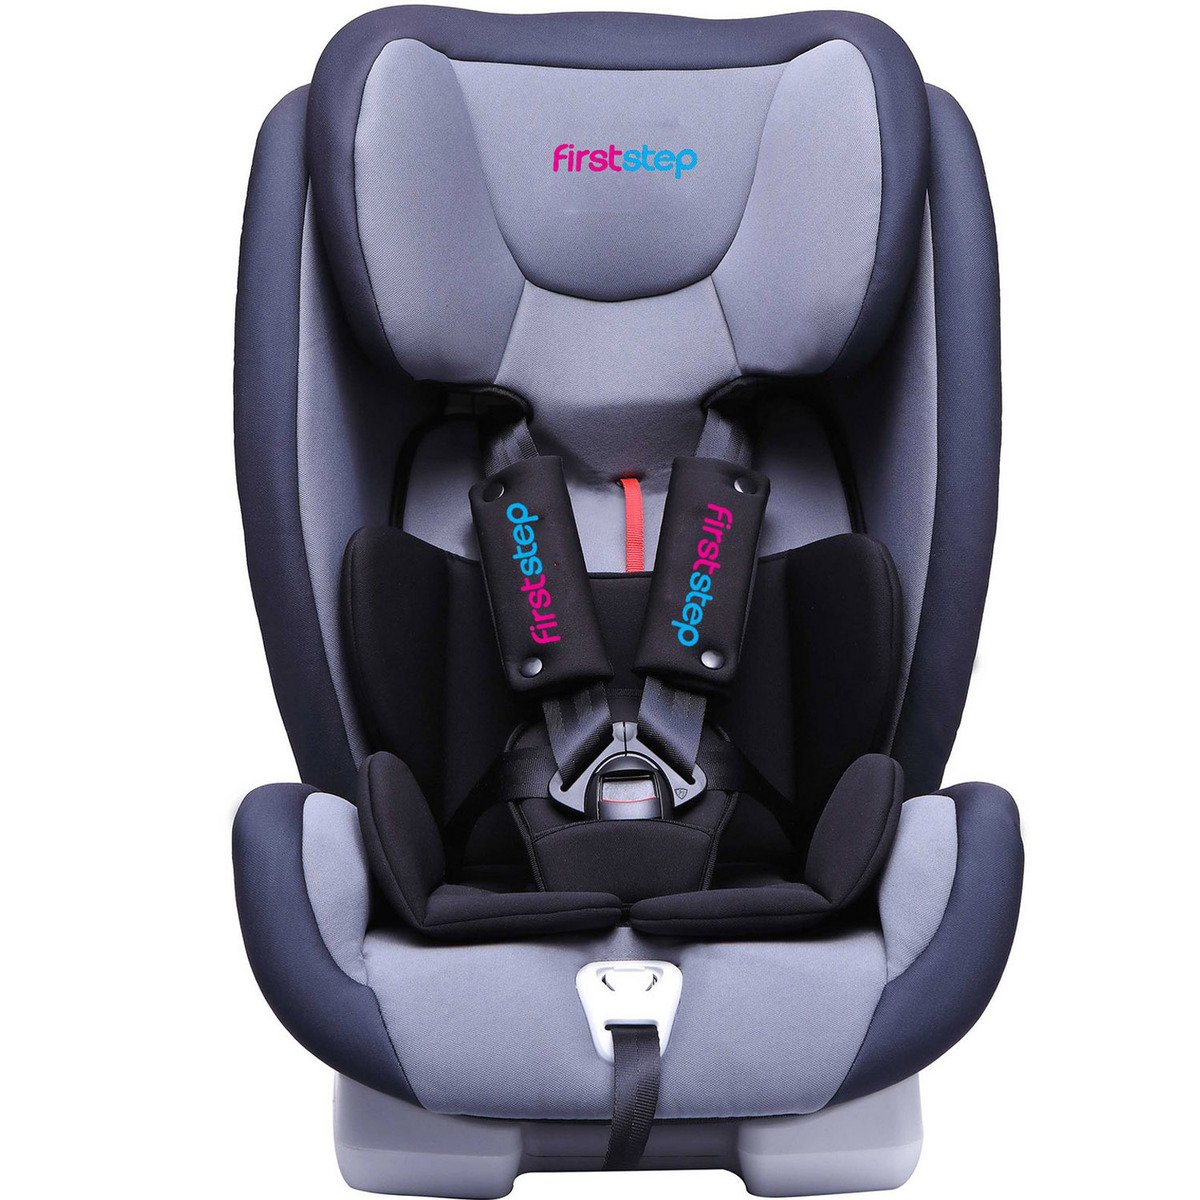 First Step Baby Car Seat E80